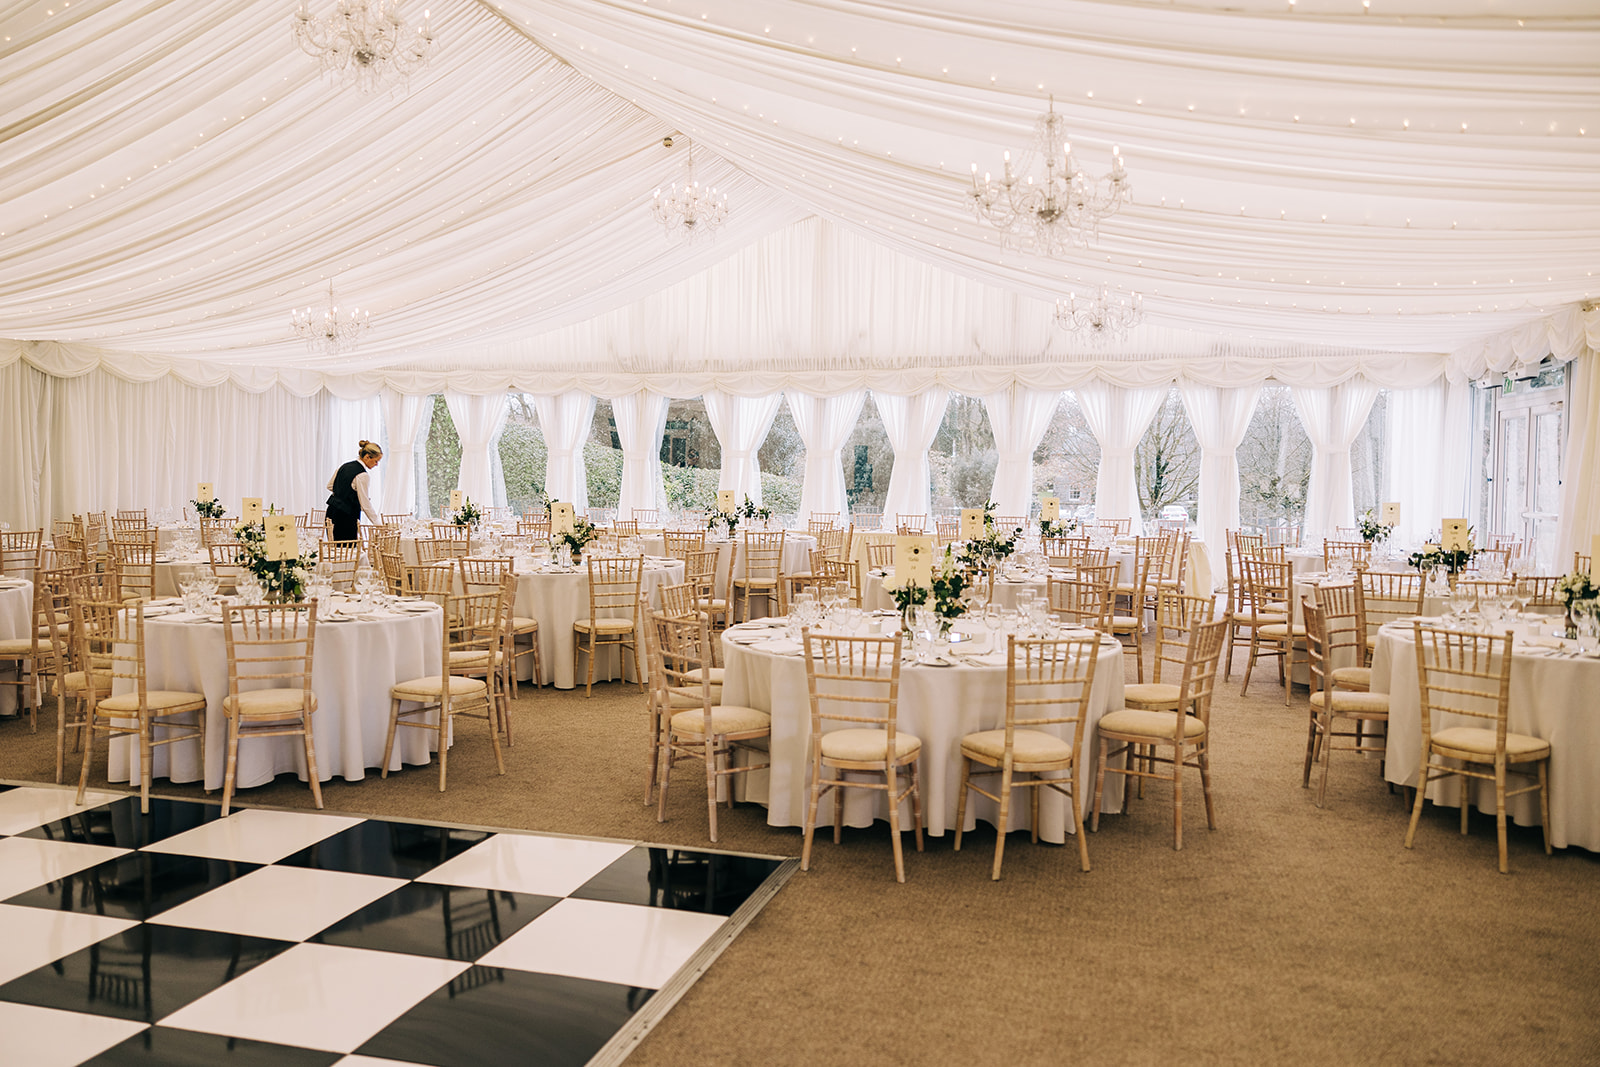 Inside the wedding marque at Clonabreany House